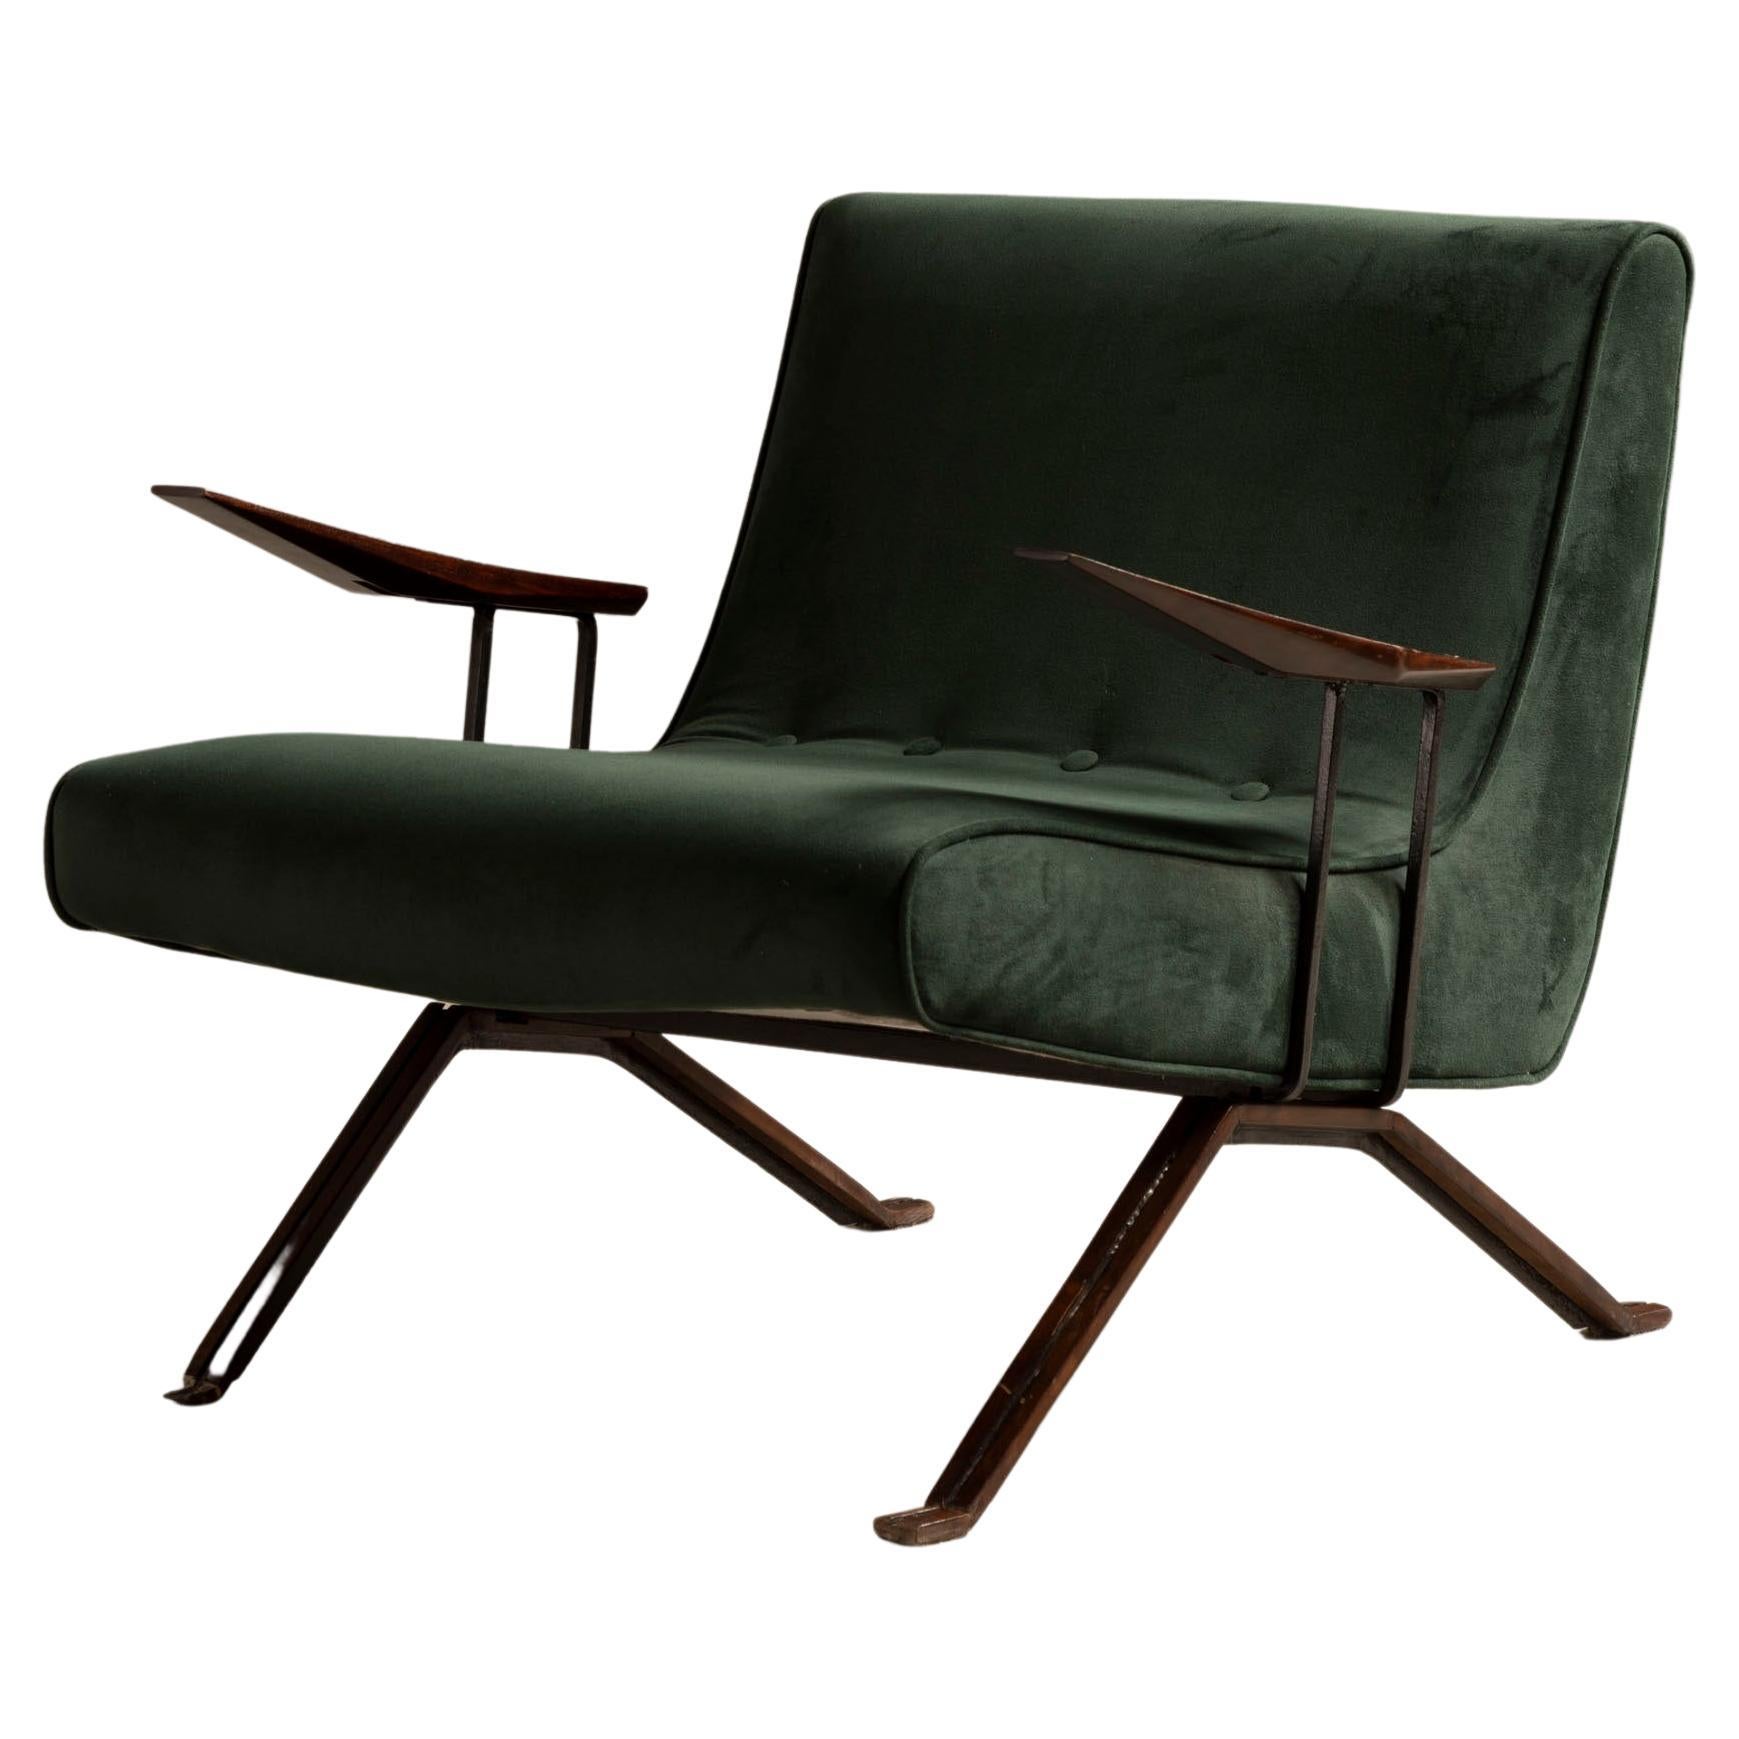 Pair of Rare "MP-01" Armchair, by Percival Lafer, Brazilian Mid-Century  Modern For Sale at 1stDibs | percival lafer chair